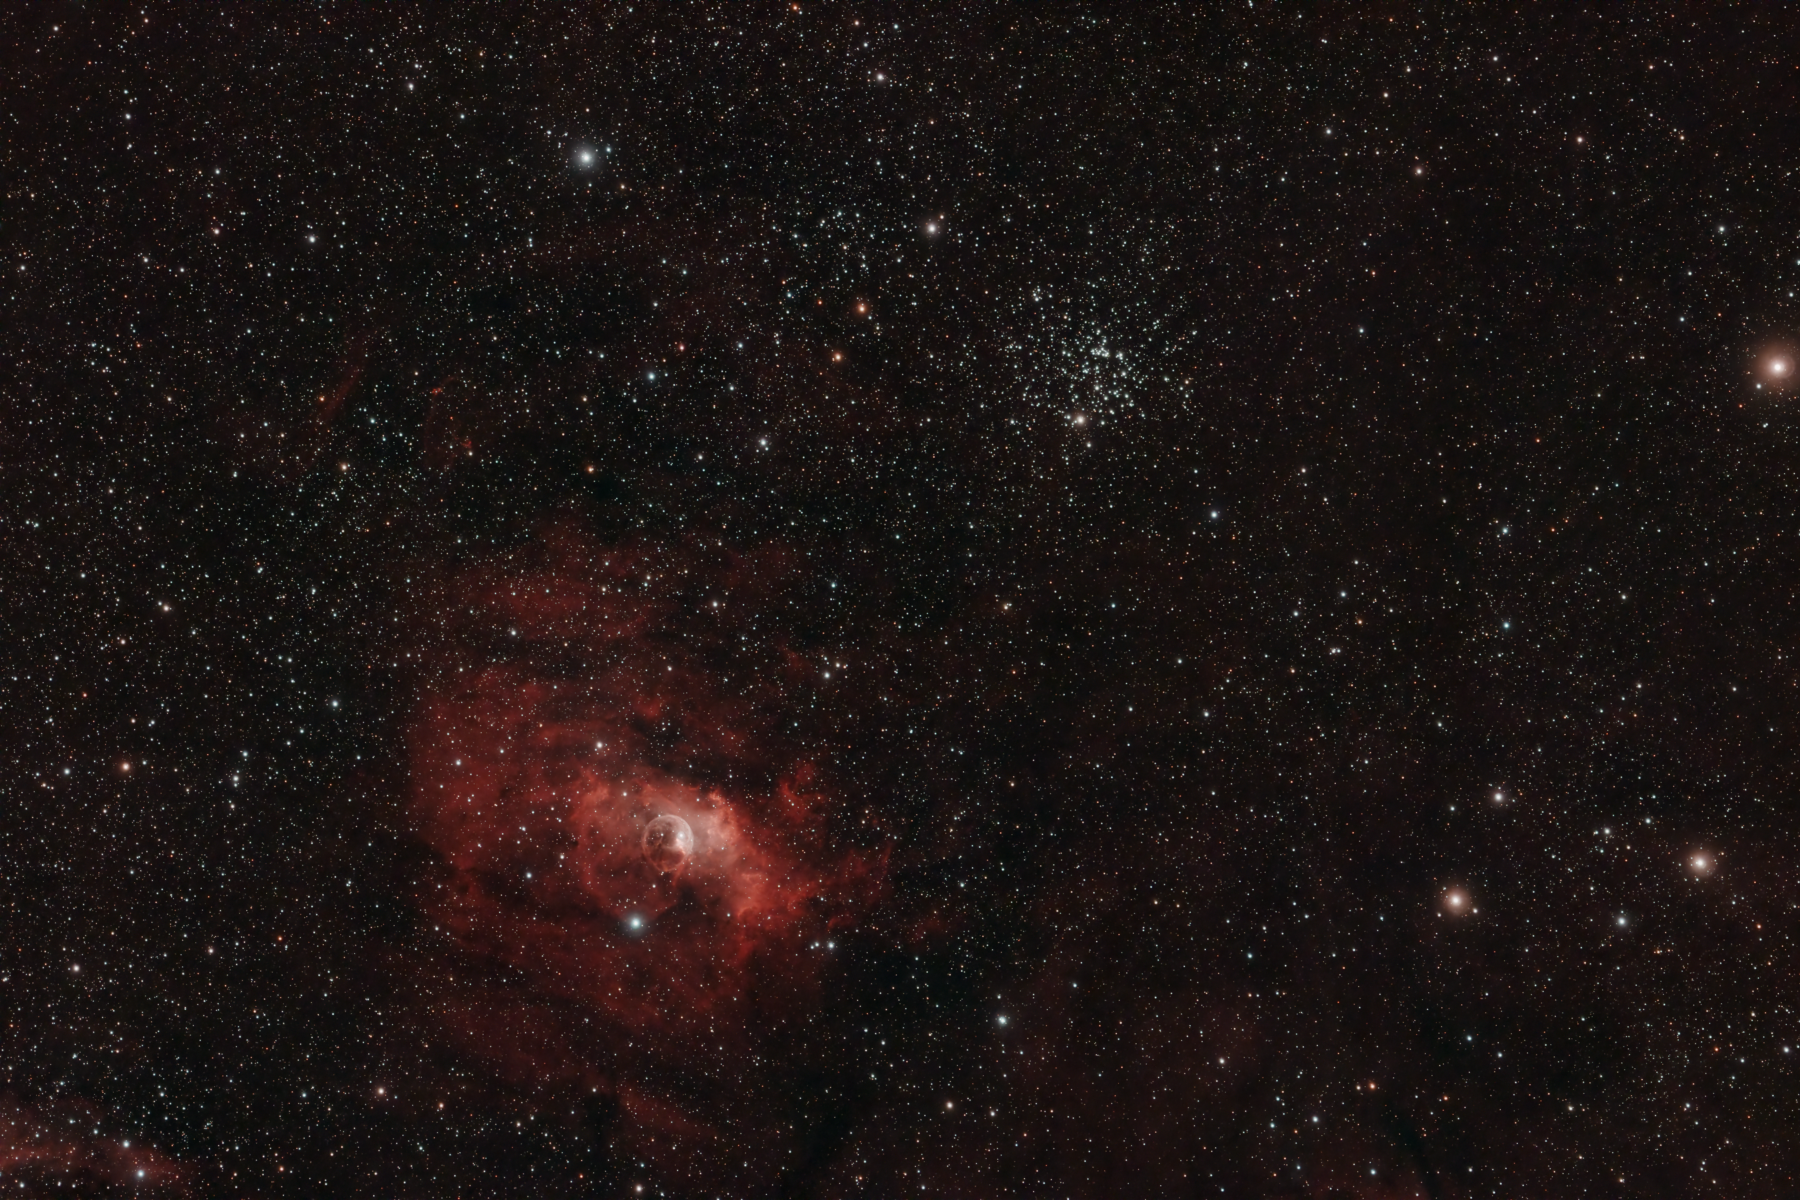 NGC 7635 and M52 in Cassiopeia